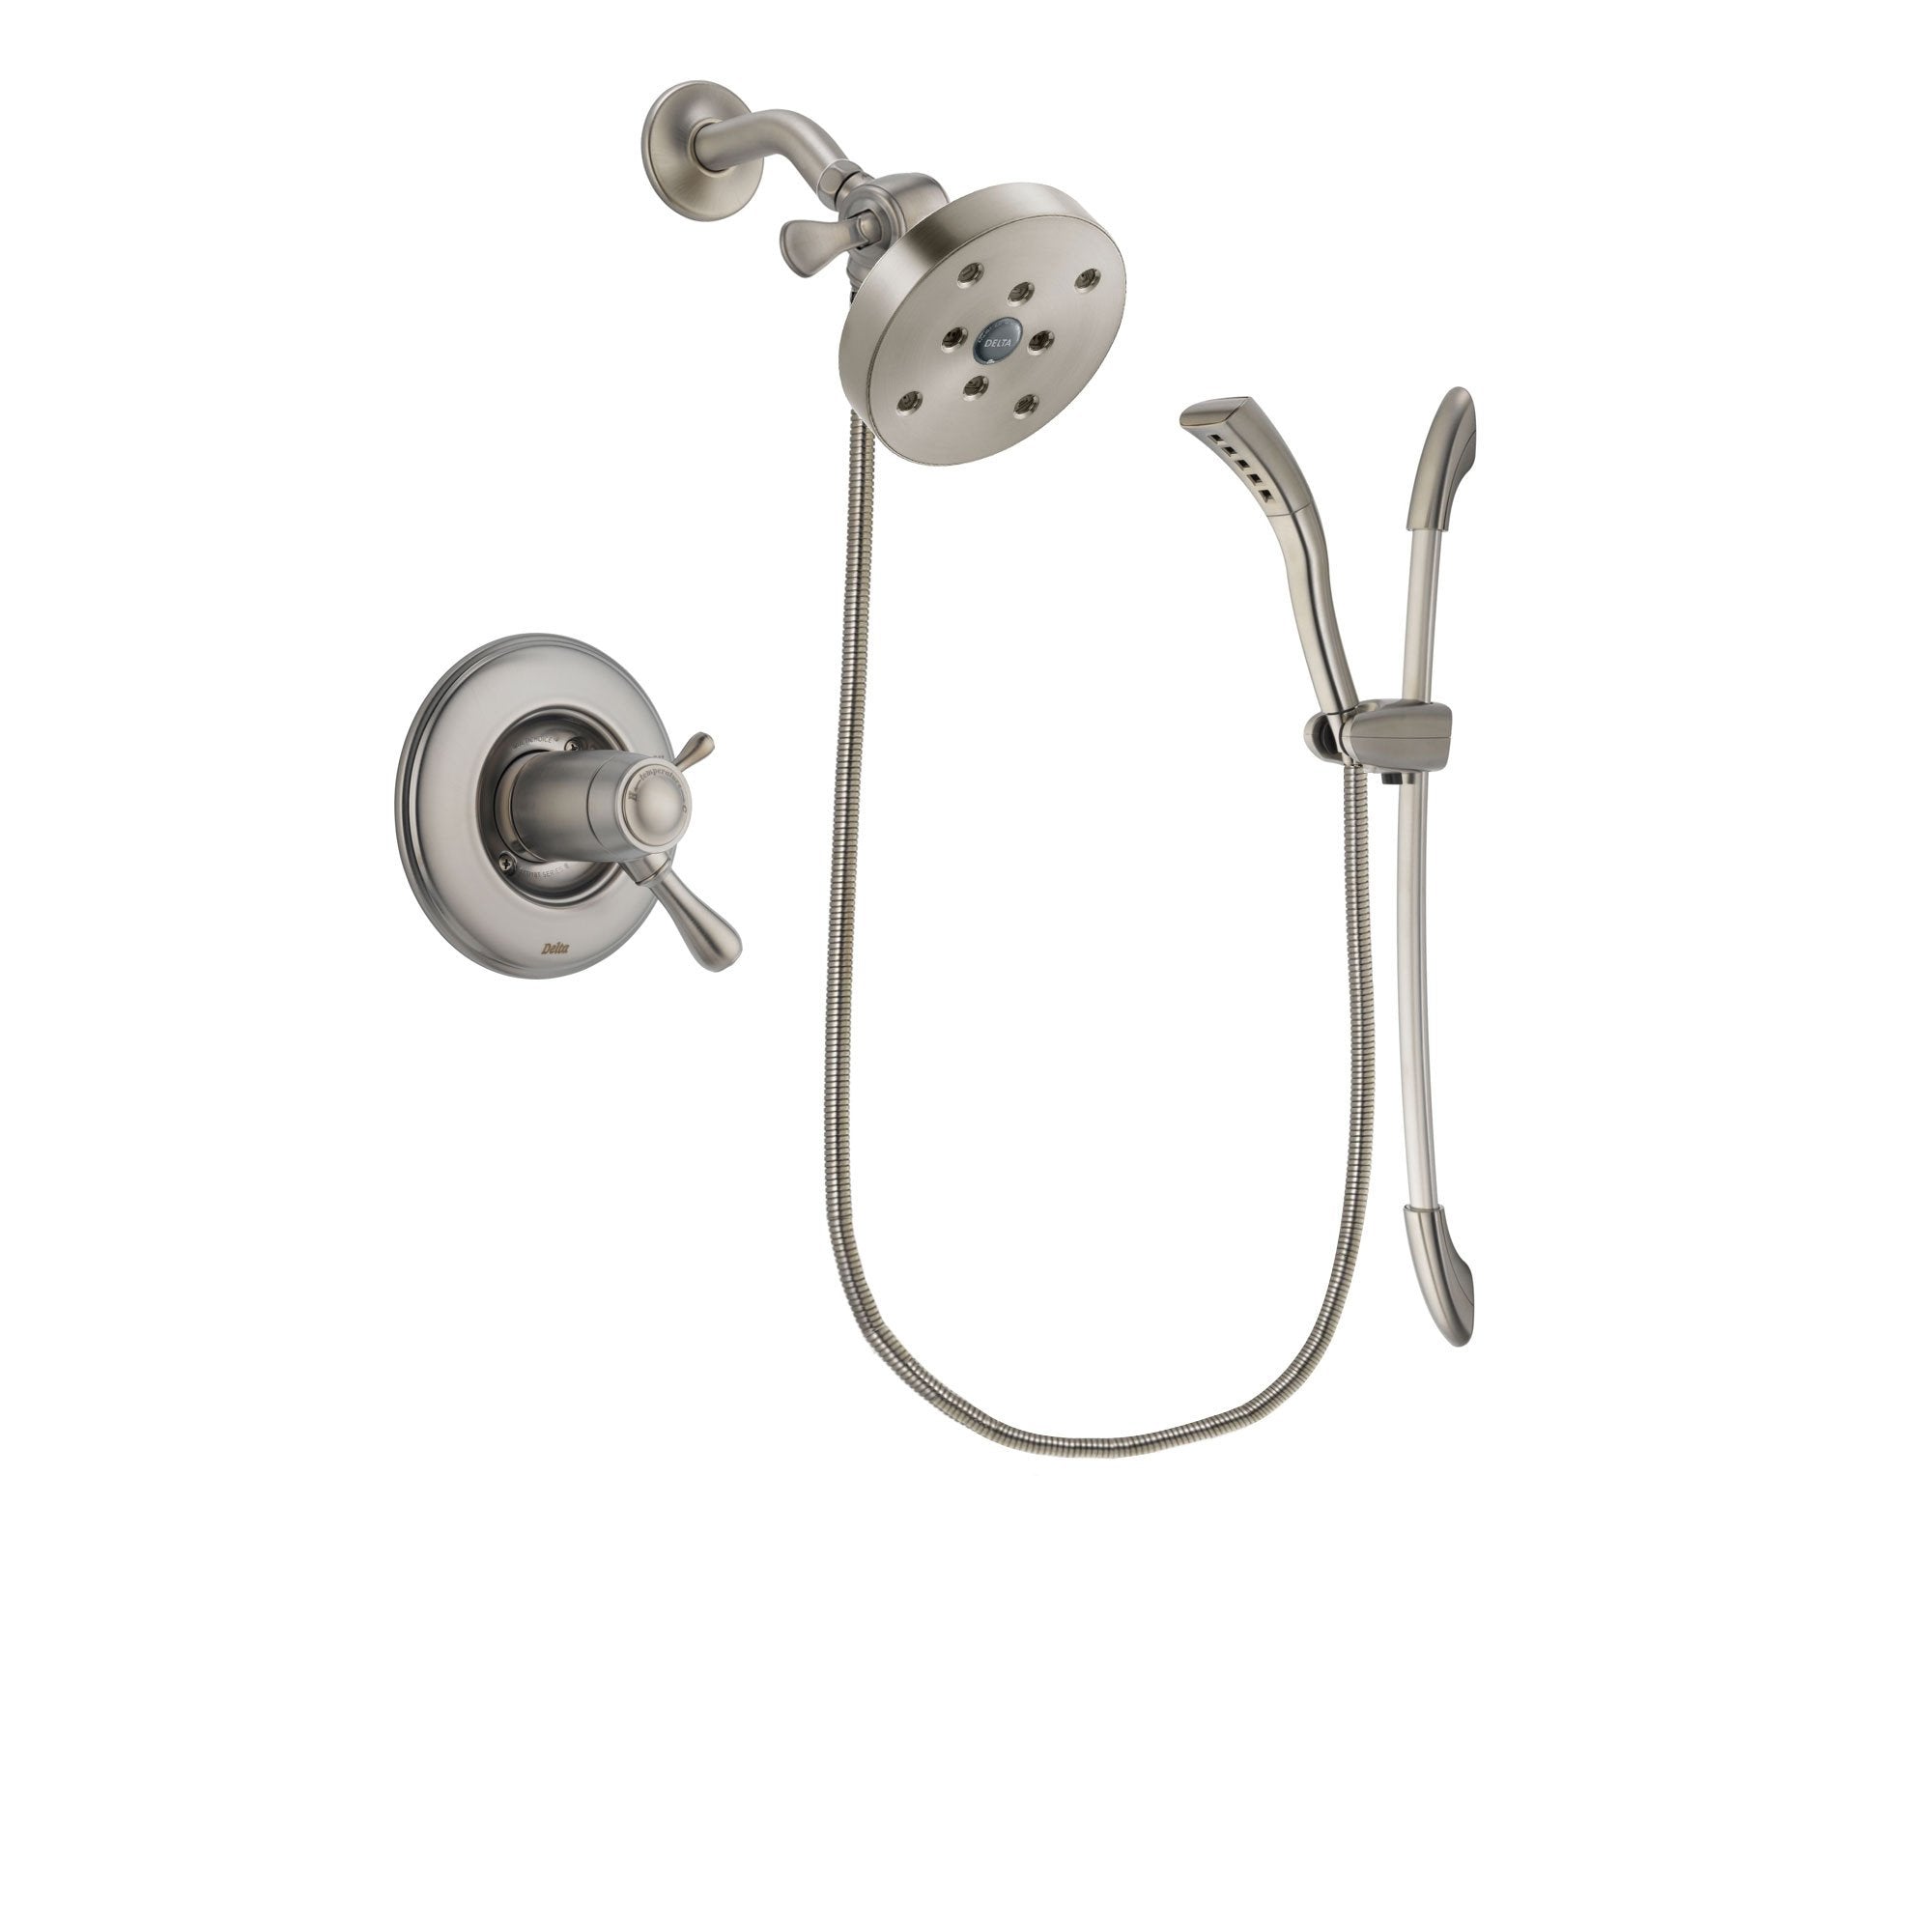 Delta Leland Stainless Steel Finish Thermostatic Shower Faucet System Package with 5-1/2 inch Shower Head and Handshower with Slide Bar Includes Rough-in Valve DSP1484V